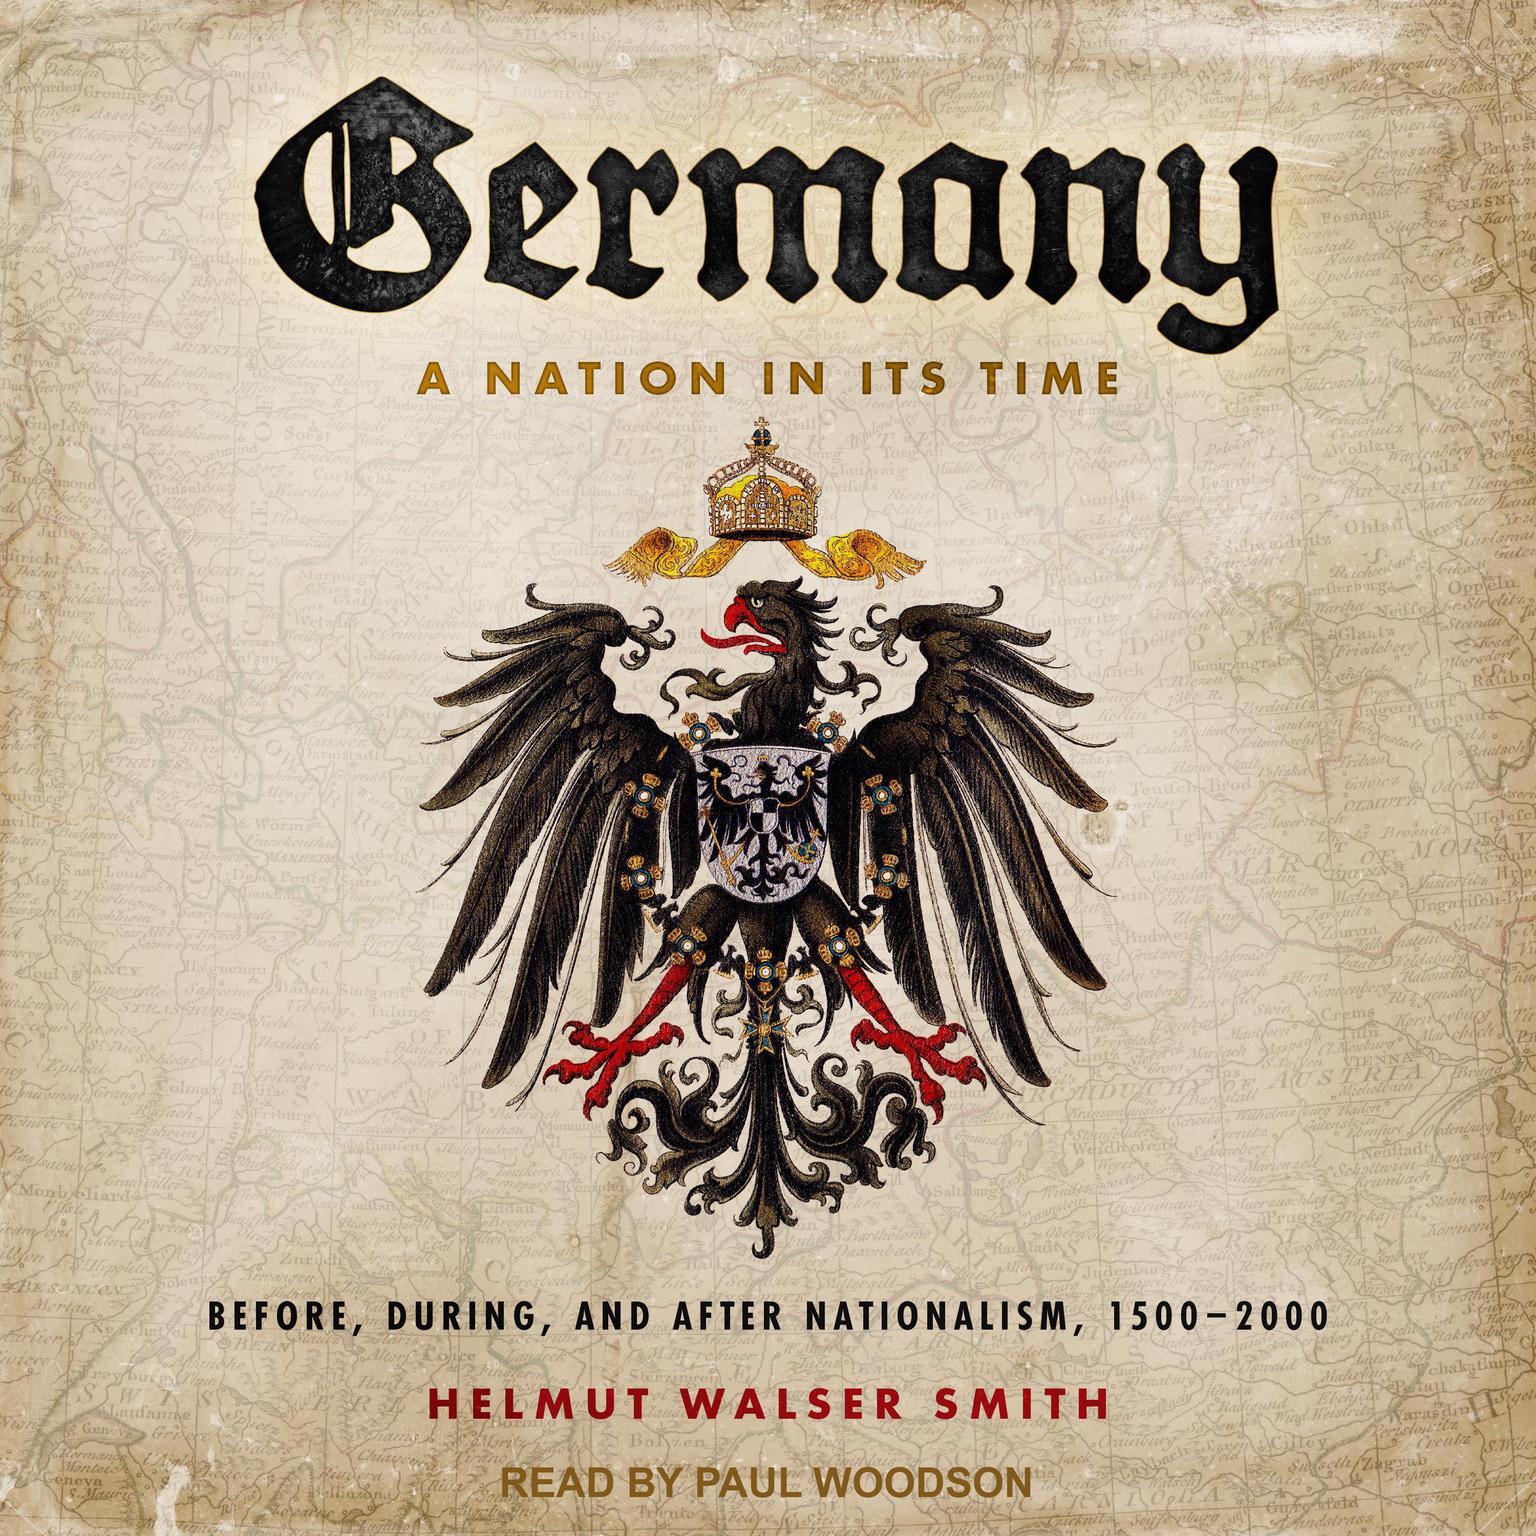 Germany: A Nation in Its Time: Before, During, and After Nationalism, 1500-2000 Audiobook, by Helmut Walser Smith